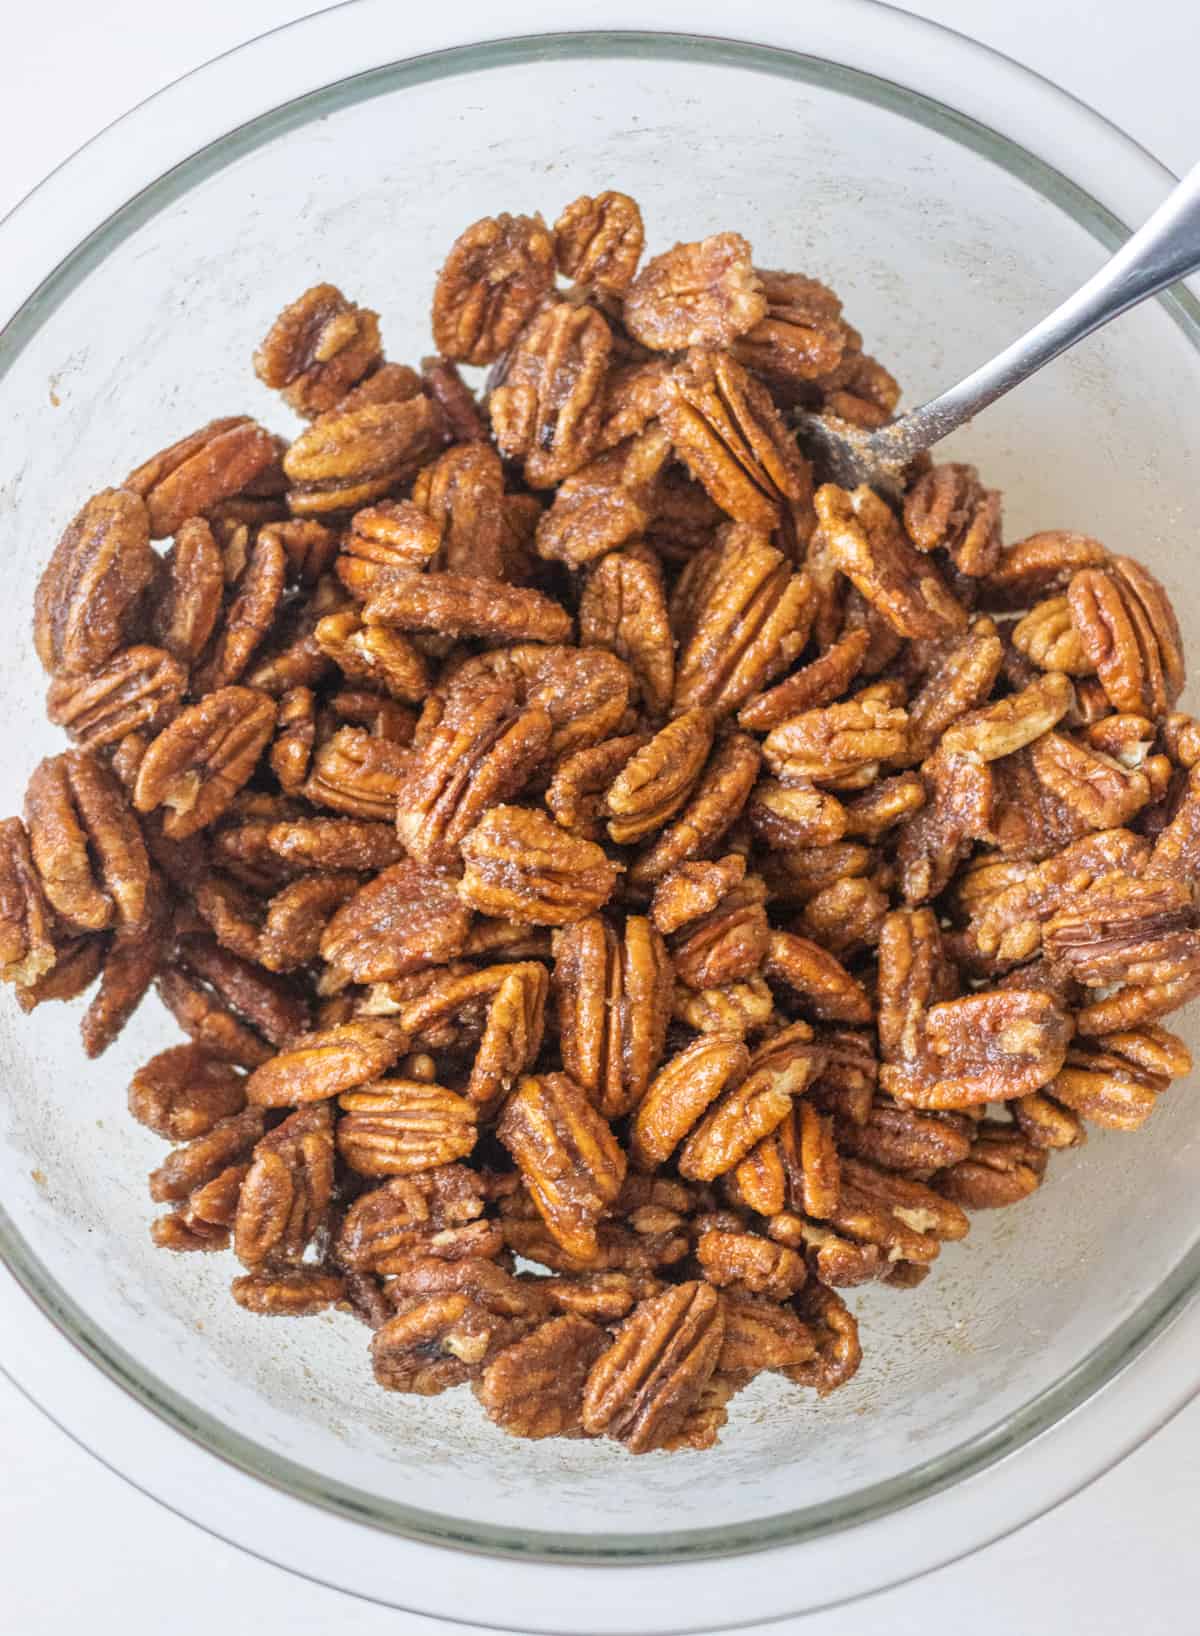 Pecan halves tossed in a brown sugar candy coating in a bowl.